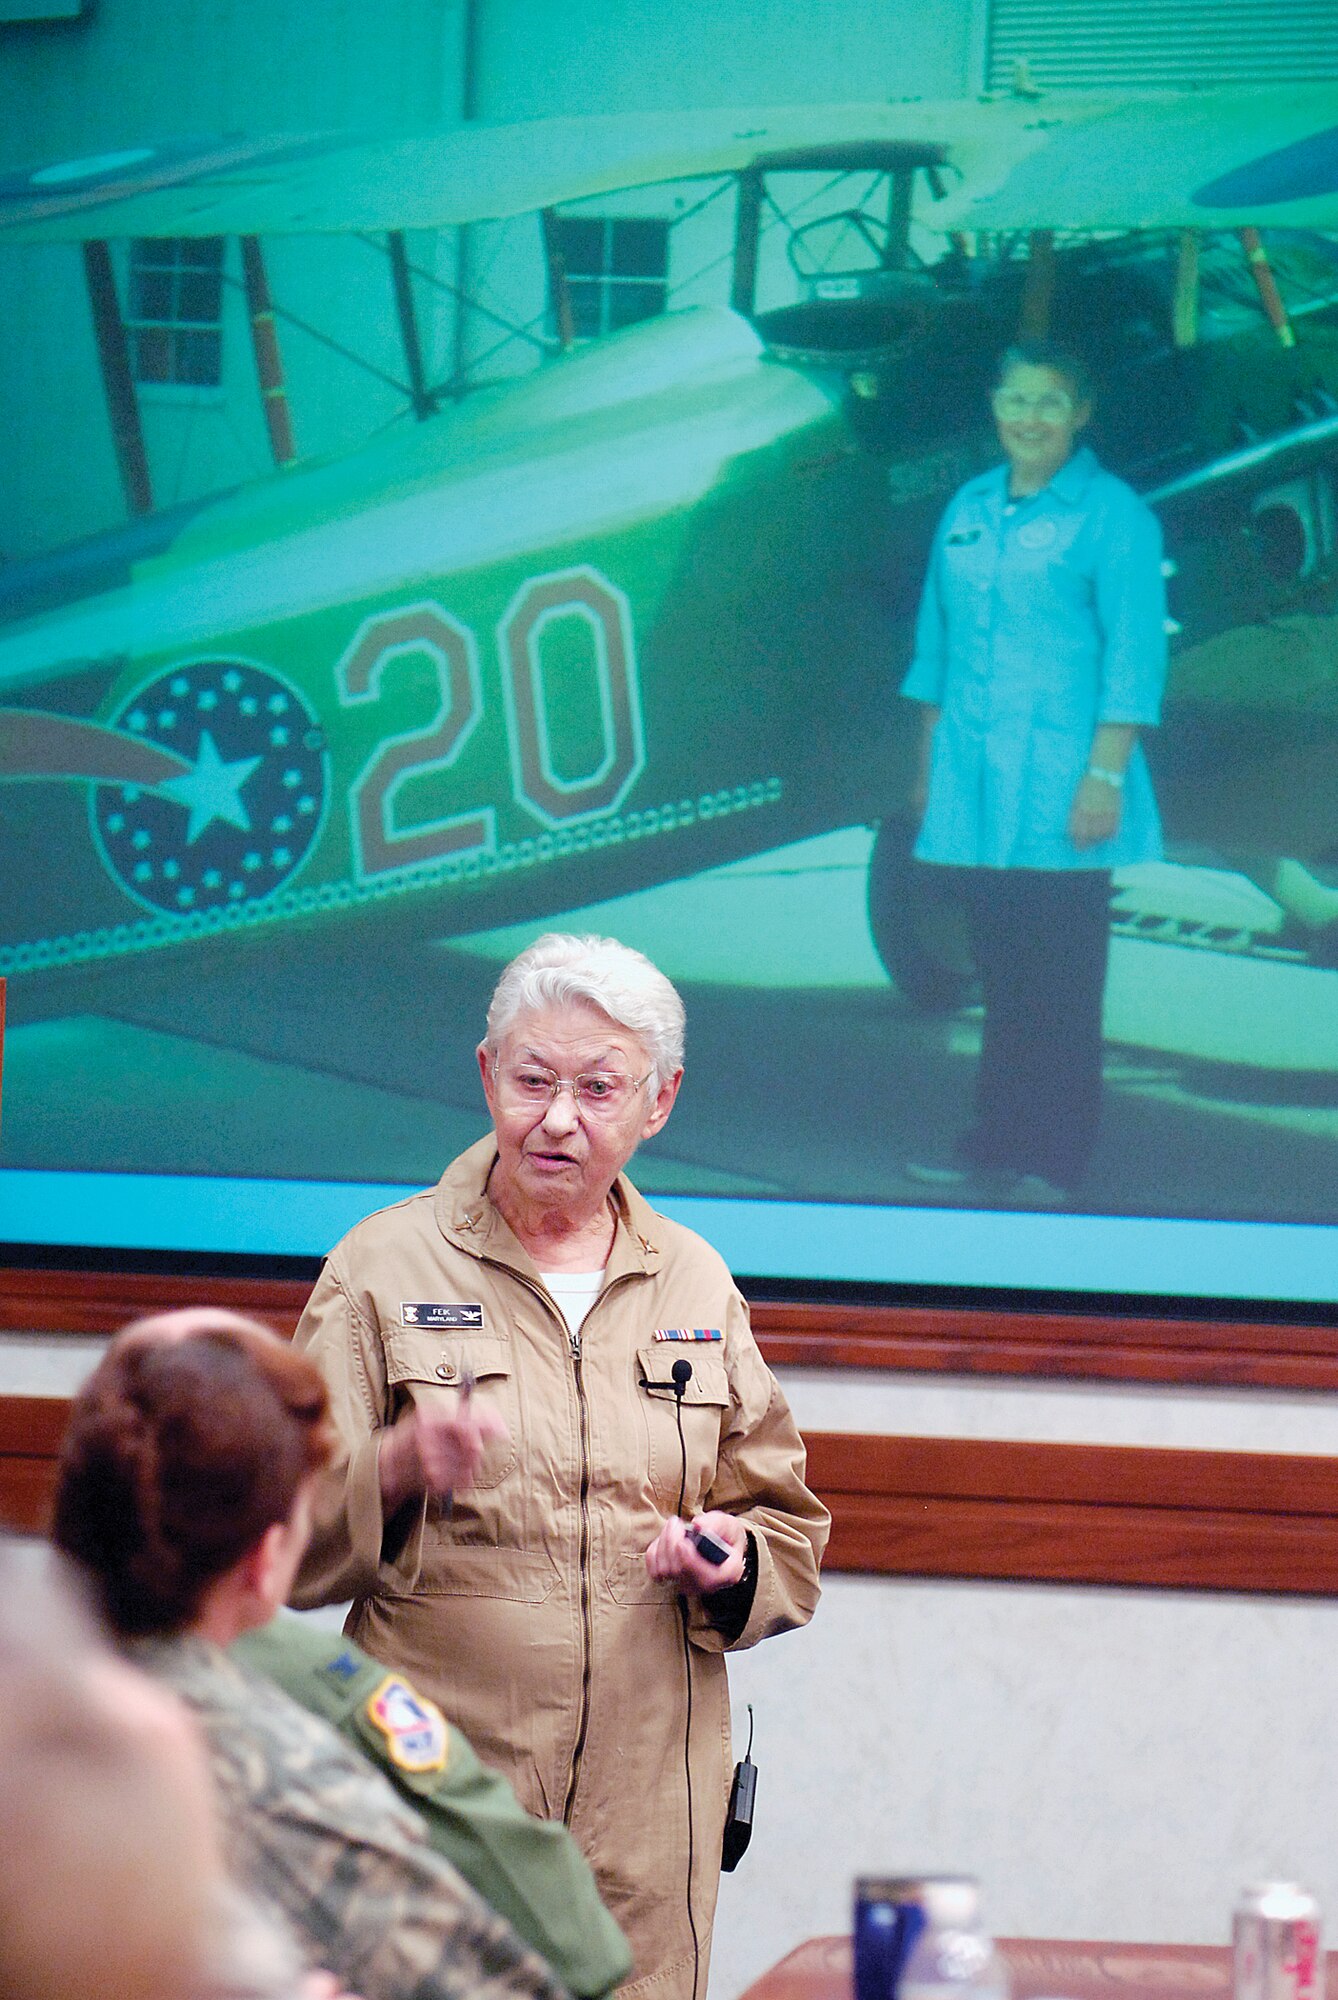 Civil Air Patrol Col. Mary Feik shows images from her early aviation career during her presentation to Tinker leaders at the Oct. 30 Senior Leader Forum in Bldg. 3001.  With more than 60 years of flying, fixing and building aircraft and teaching, the aviator told stories of learning from her father and from sergeants who didn’t let her gender or age keep them from mentoring her. (Air Force photo/Margo Wright)